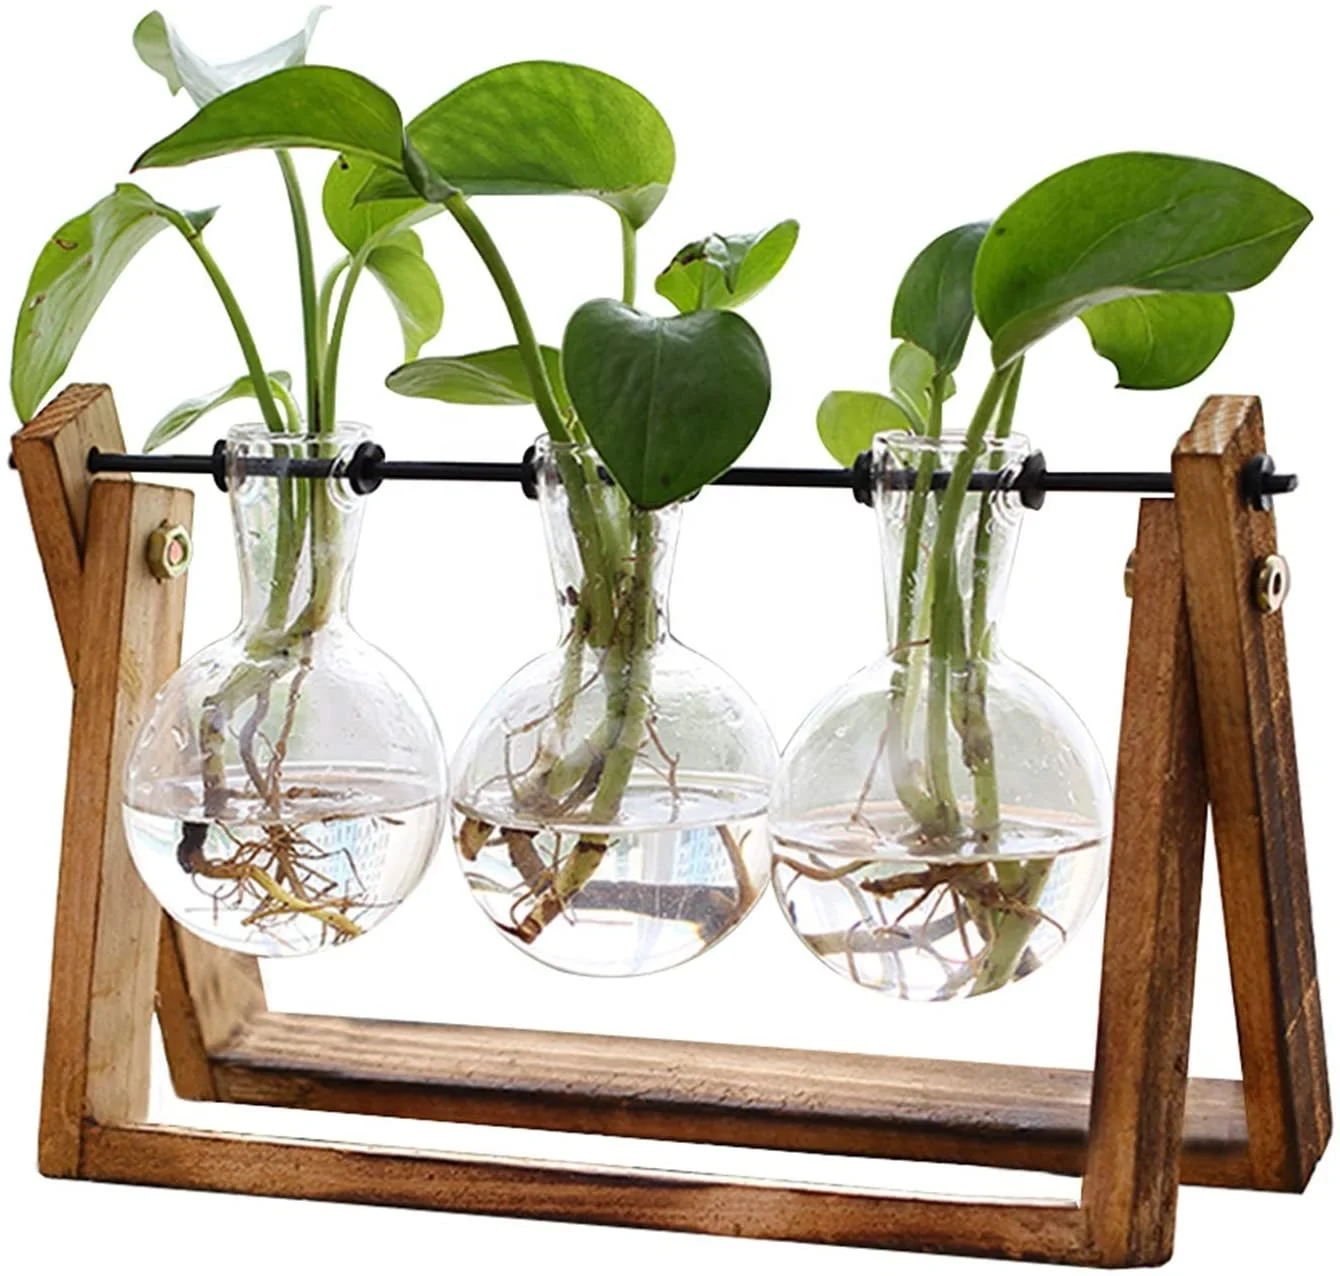 

Plant Terrarium with Wooden Stand, Air Planter Bulb Glass Vase Metal Swivel Holder Retro Tabletop for Hydroponics Home Garden